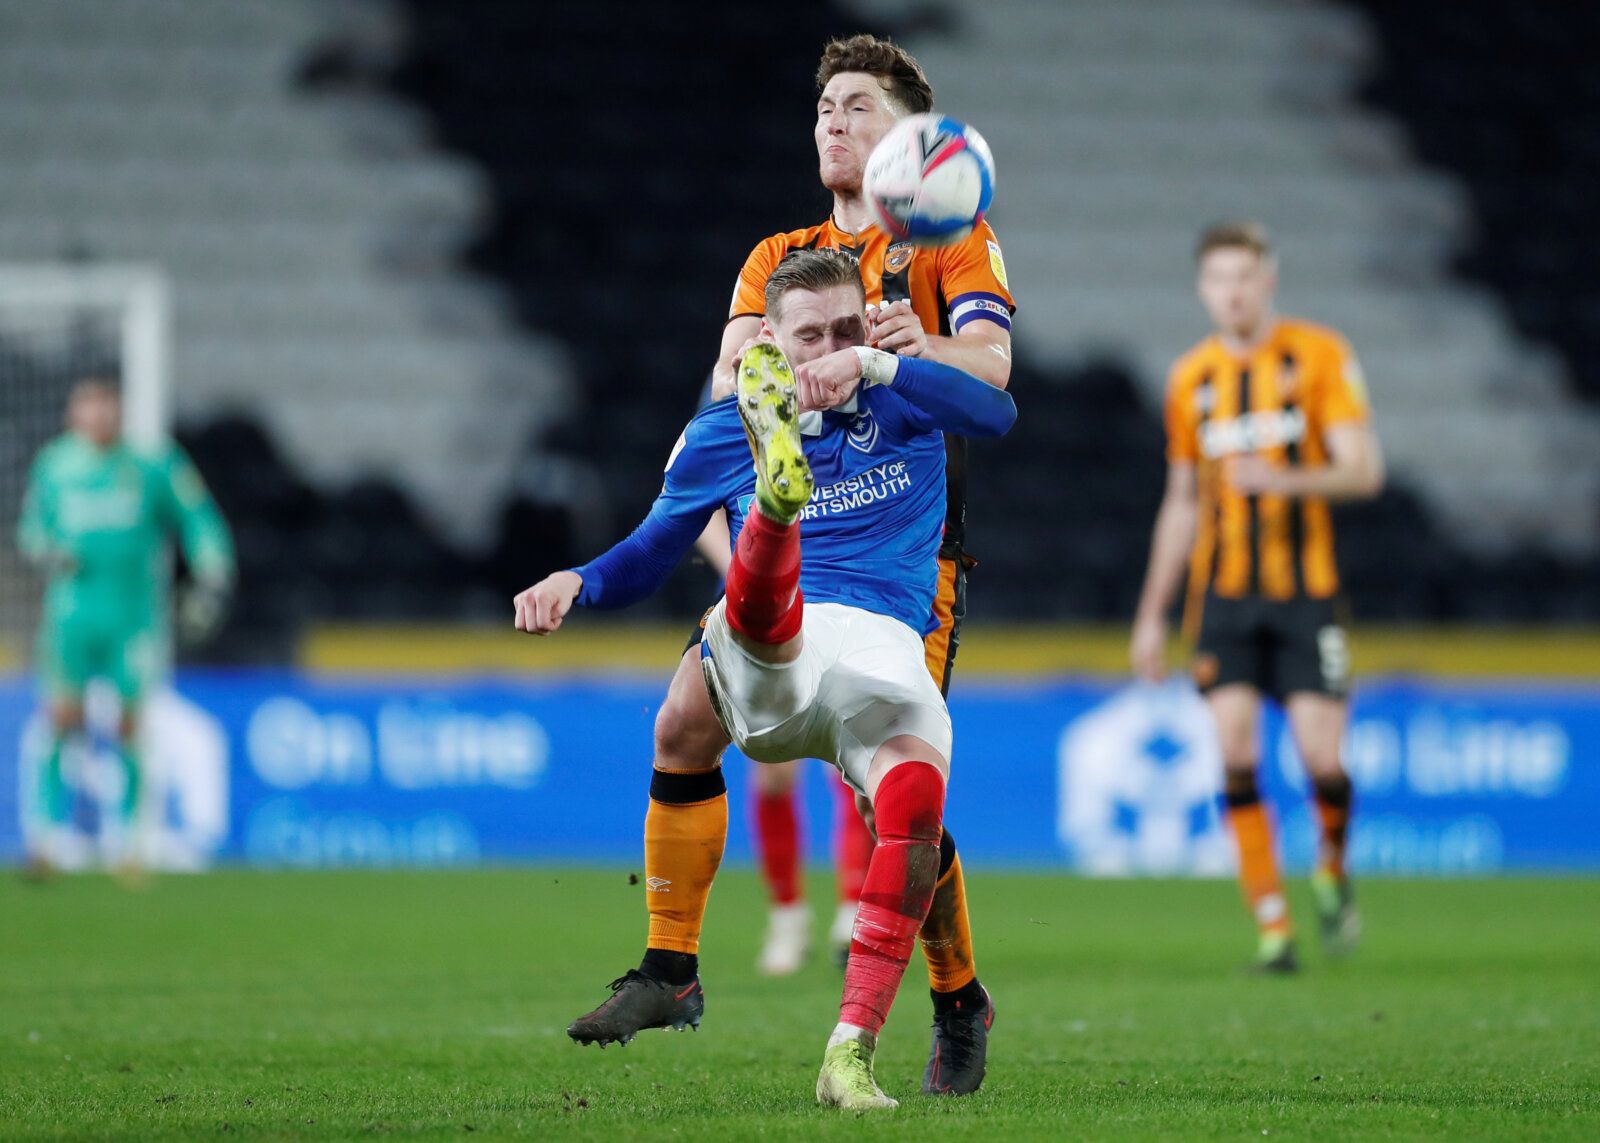 Soccer Football - League One - Hull City v Portsmouth- KCOM Stadium, Hull, Britain - December 18, 2020  Hull City's Richard Smallwood in action with Portsmouth's Ronan Curtis   Action Images/Lee Smith  EDITORIAL USE ONLY. No use with unauthorized audio, video, data, fixture lists, club/league logos or 